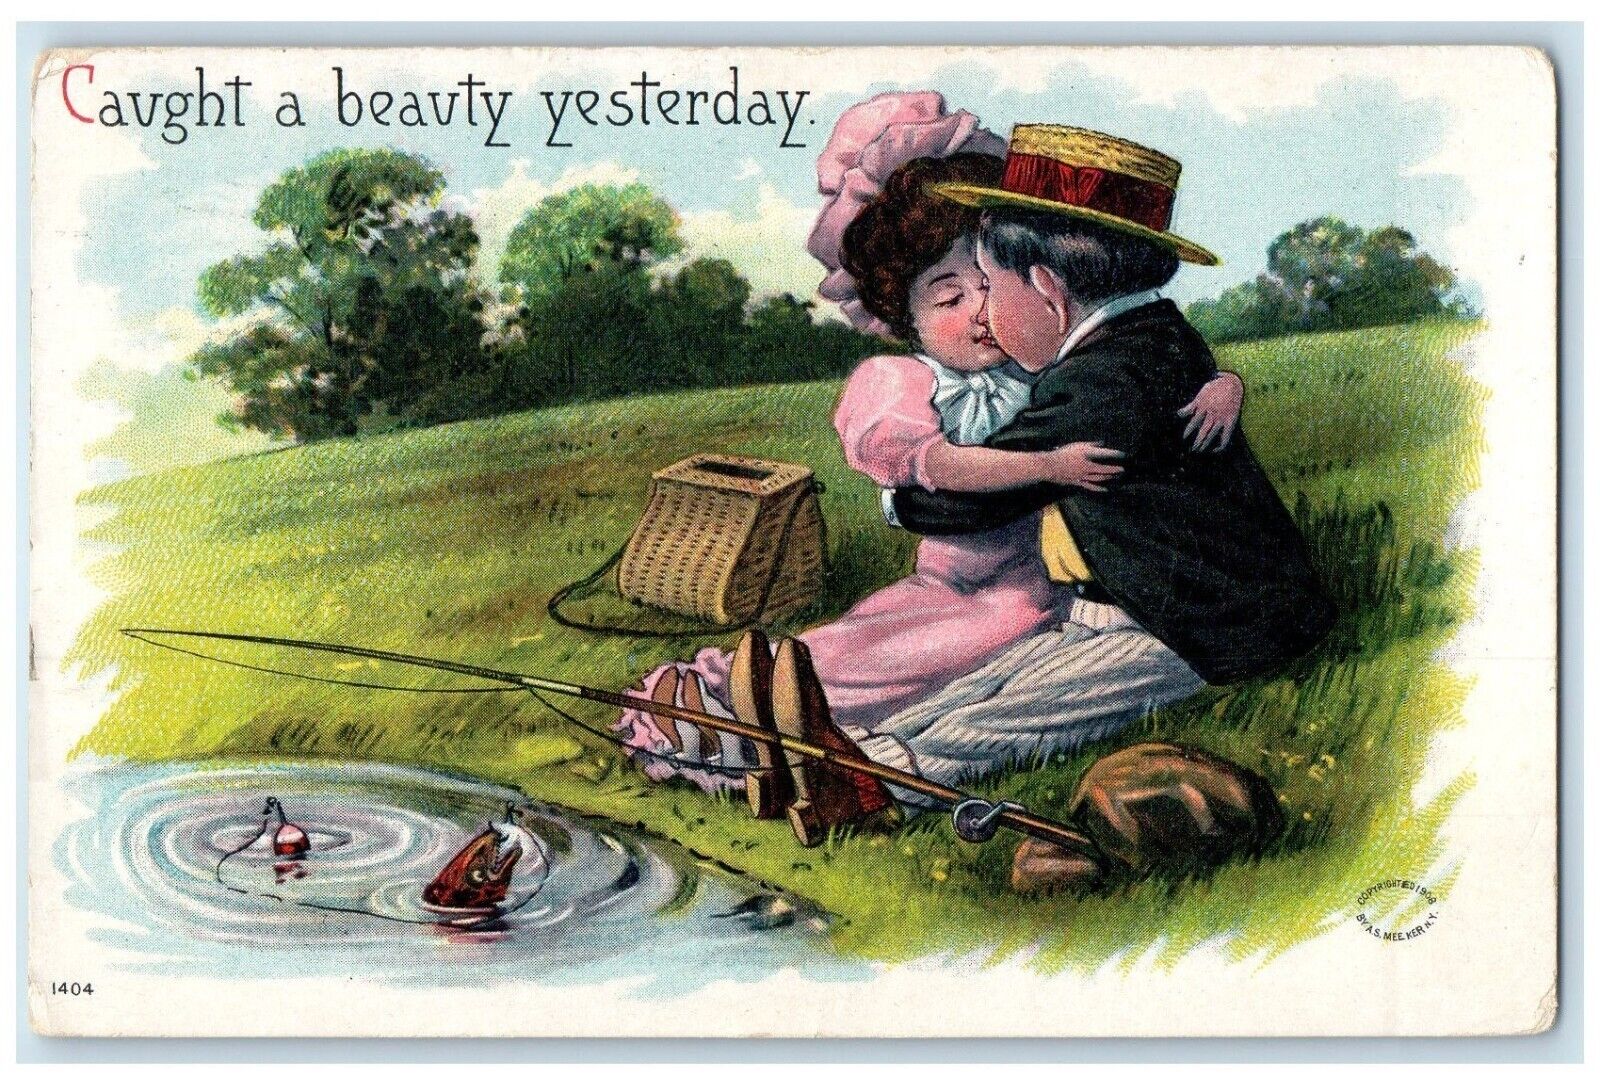 1908 Couple Kissing Romance Fishing Caught A Beauty Yesterday Embossed Postcard